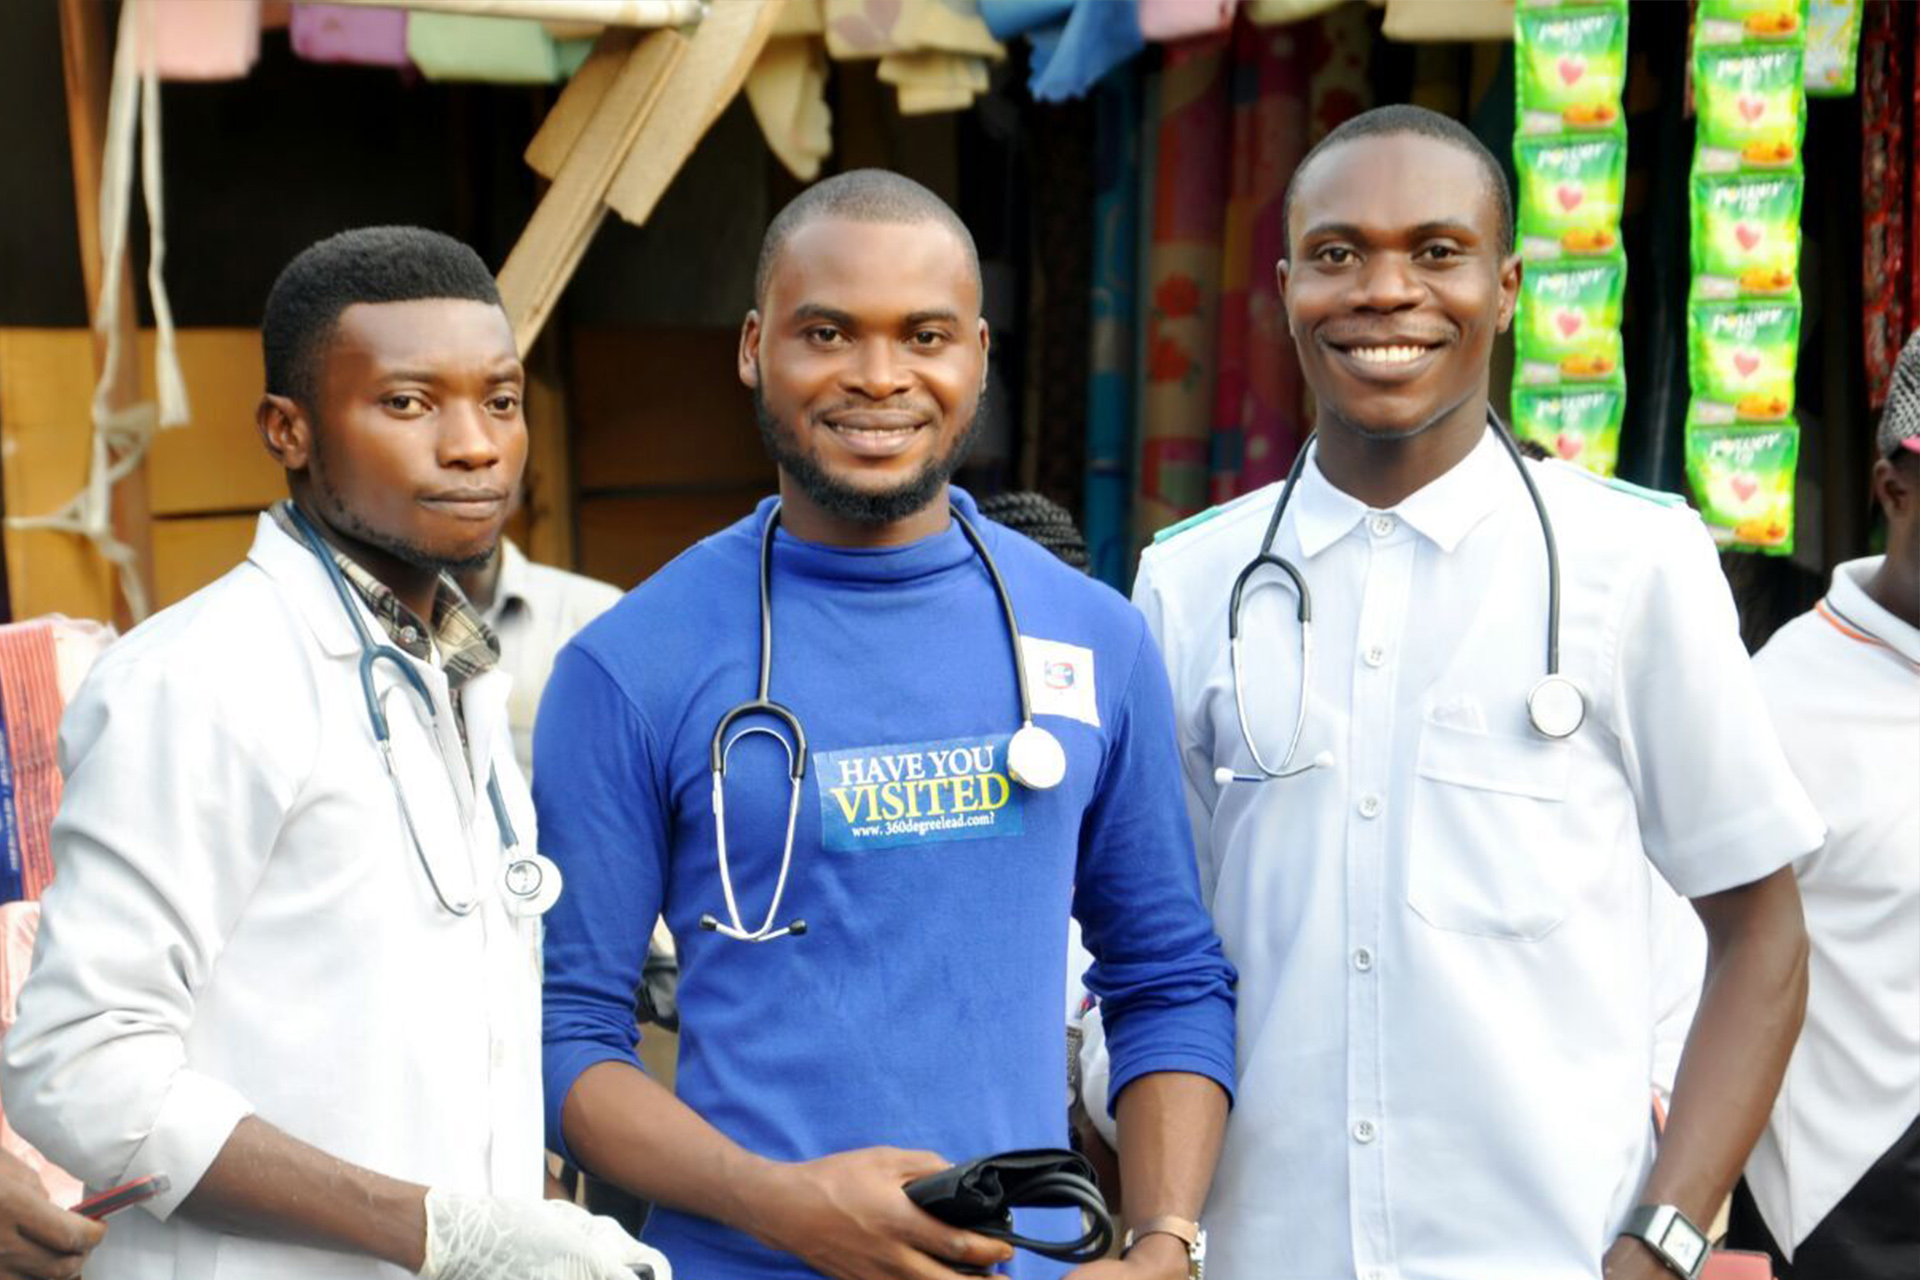 Victor Eze with members of 360degreeHEALTH NETwork Nigeria